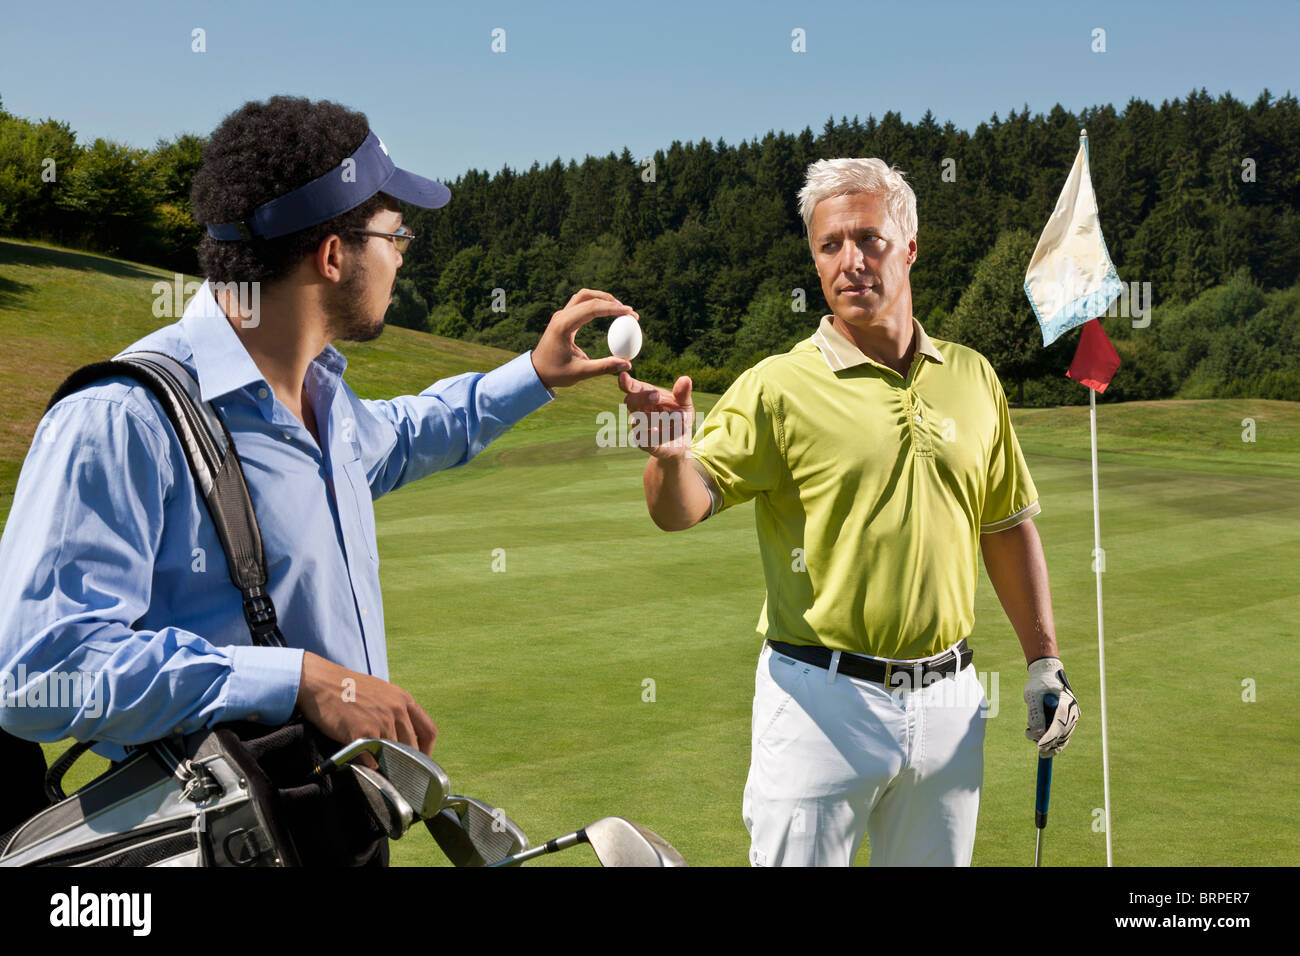 Caddy gives an egg to another golfer Stock Photo